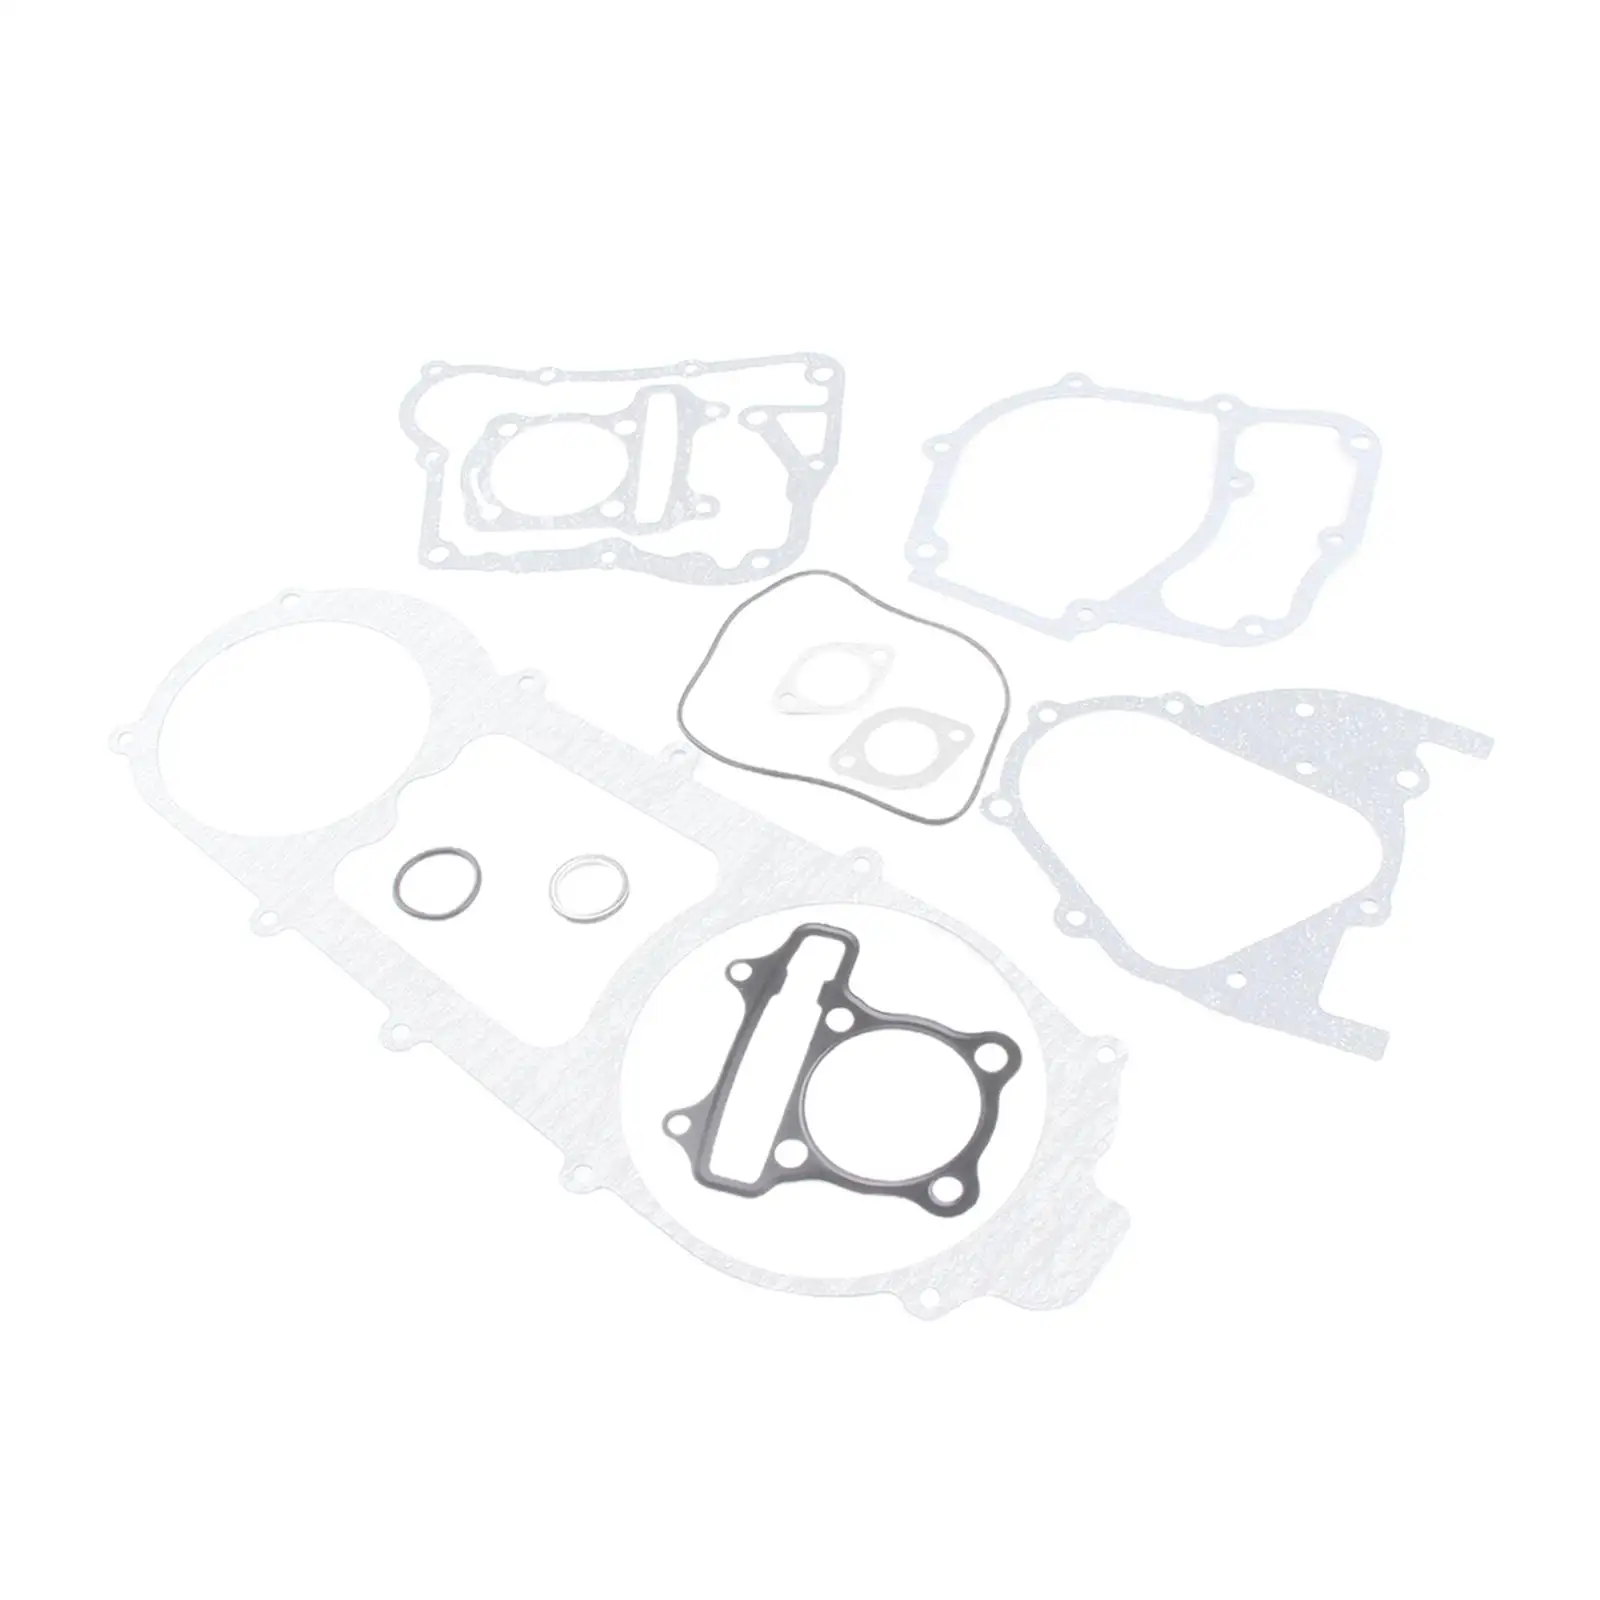  Engine Head Gasket  for GY6 150cc Moped Scooters  Go Karts High  resistant;  machining size;